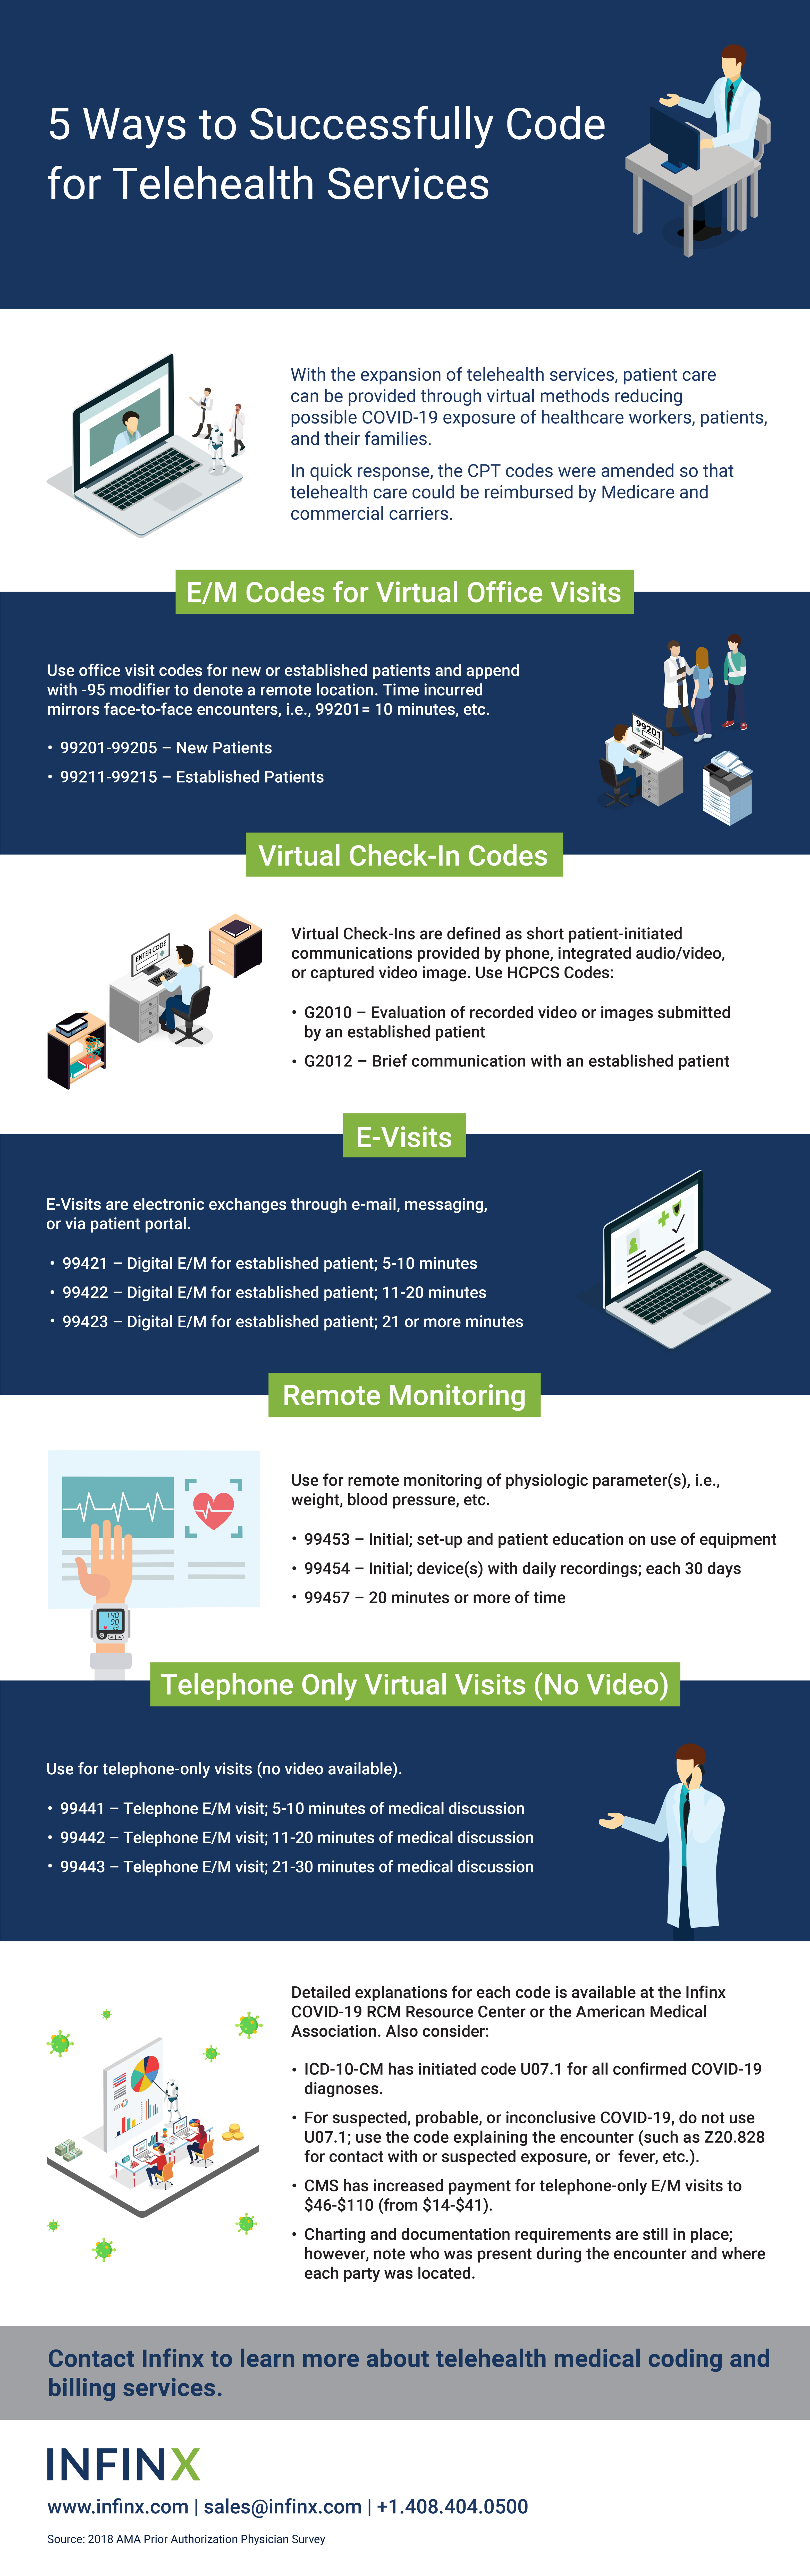 Infinx-Infographic-5 Ways to Successfully Code for Telehealth Services